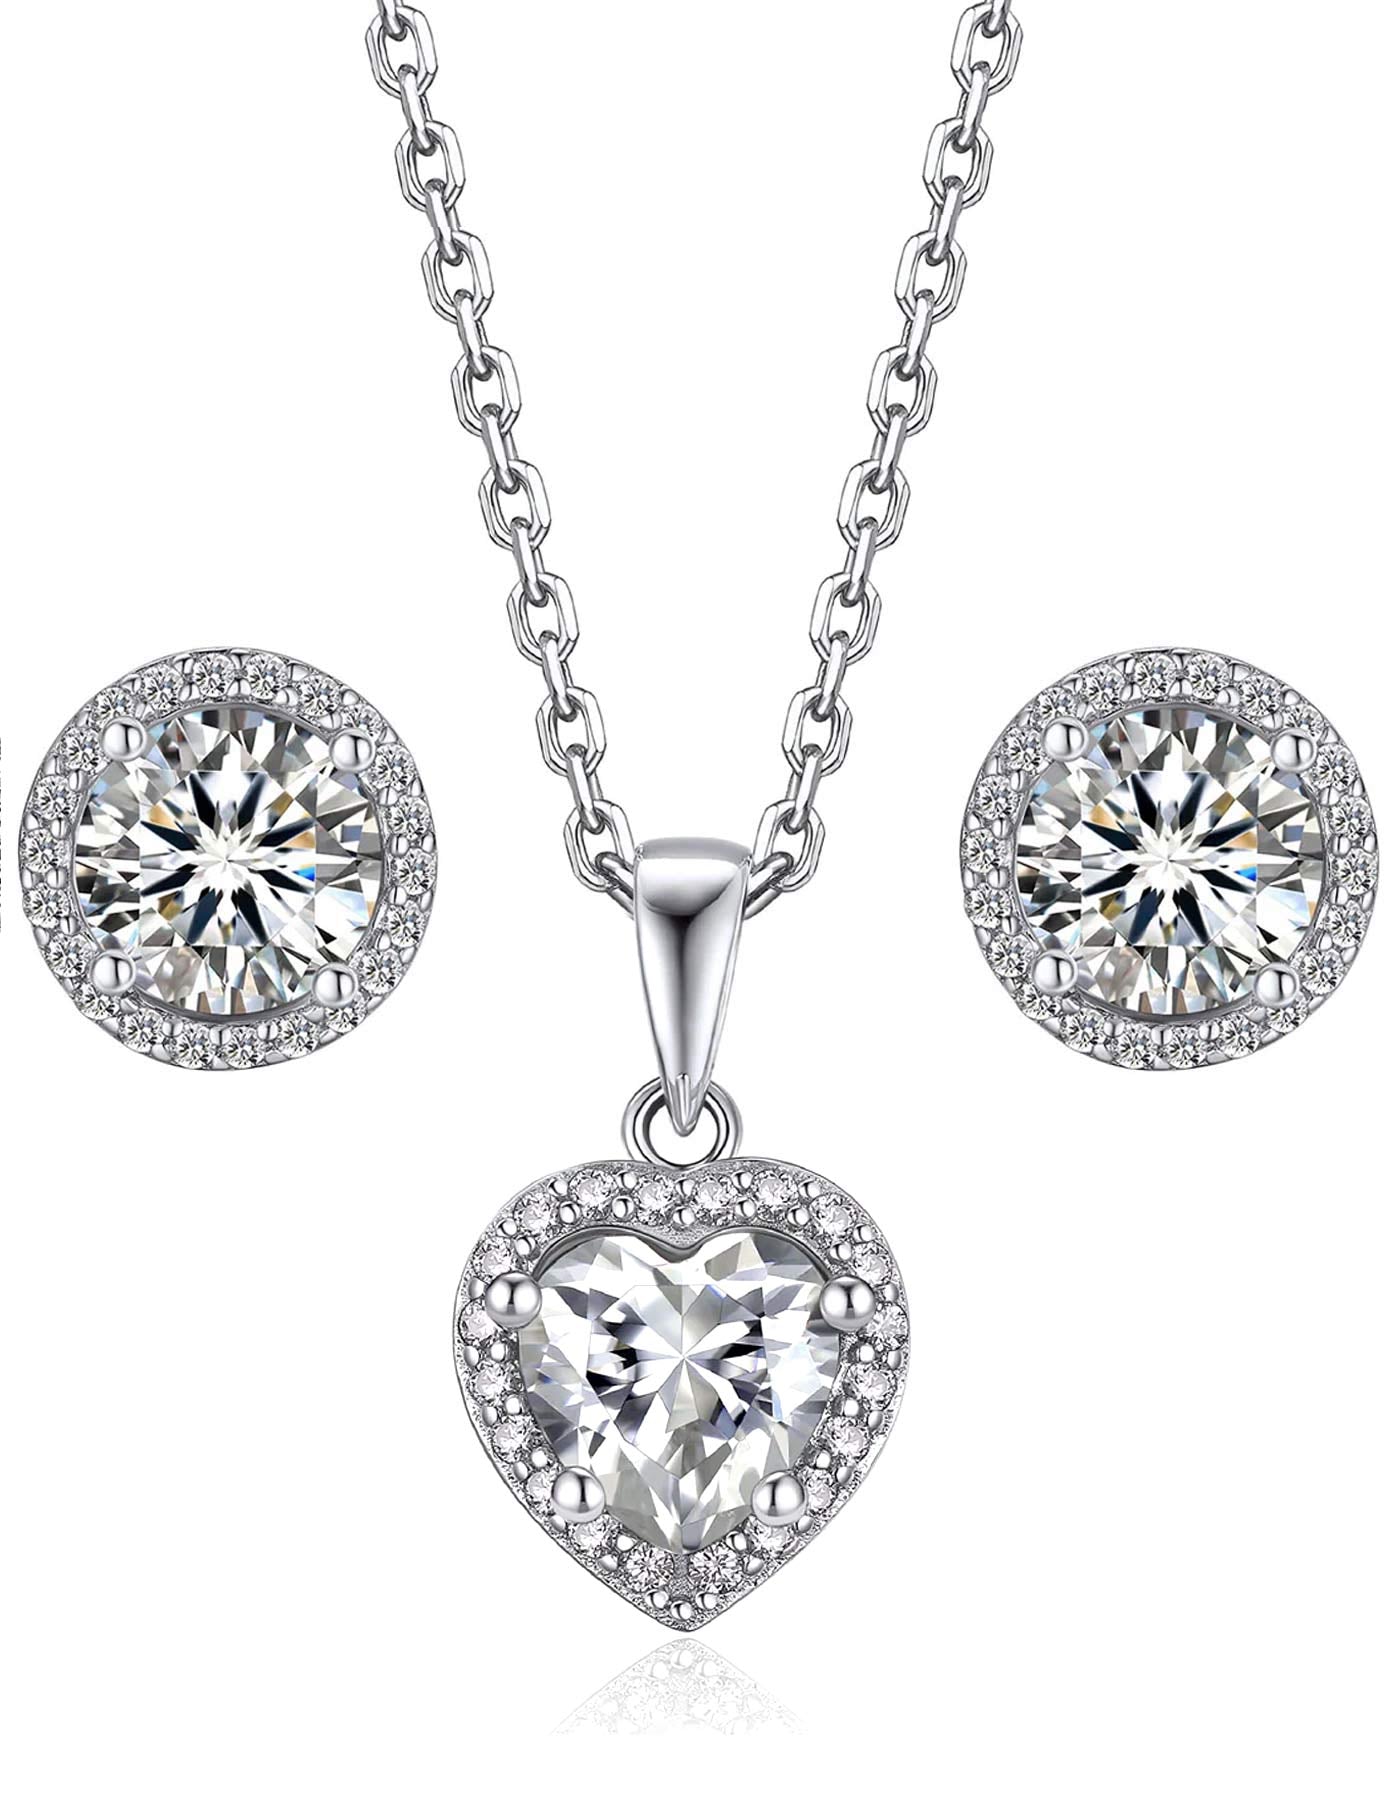 MomentWish Moissanite Heart Pendant Necklace and Halo Stud Earrings